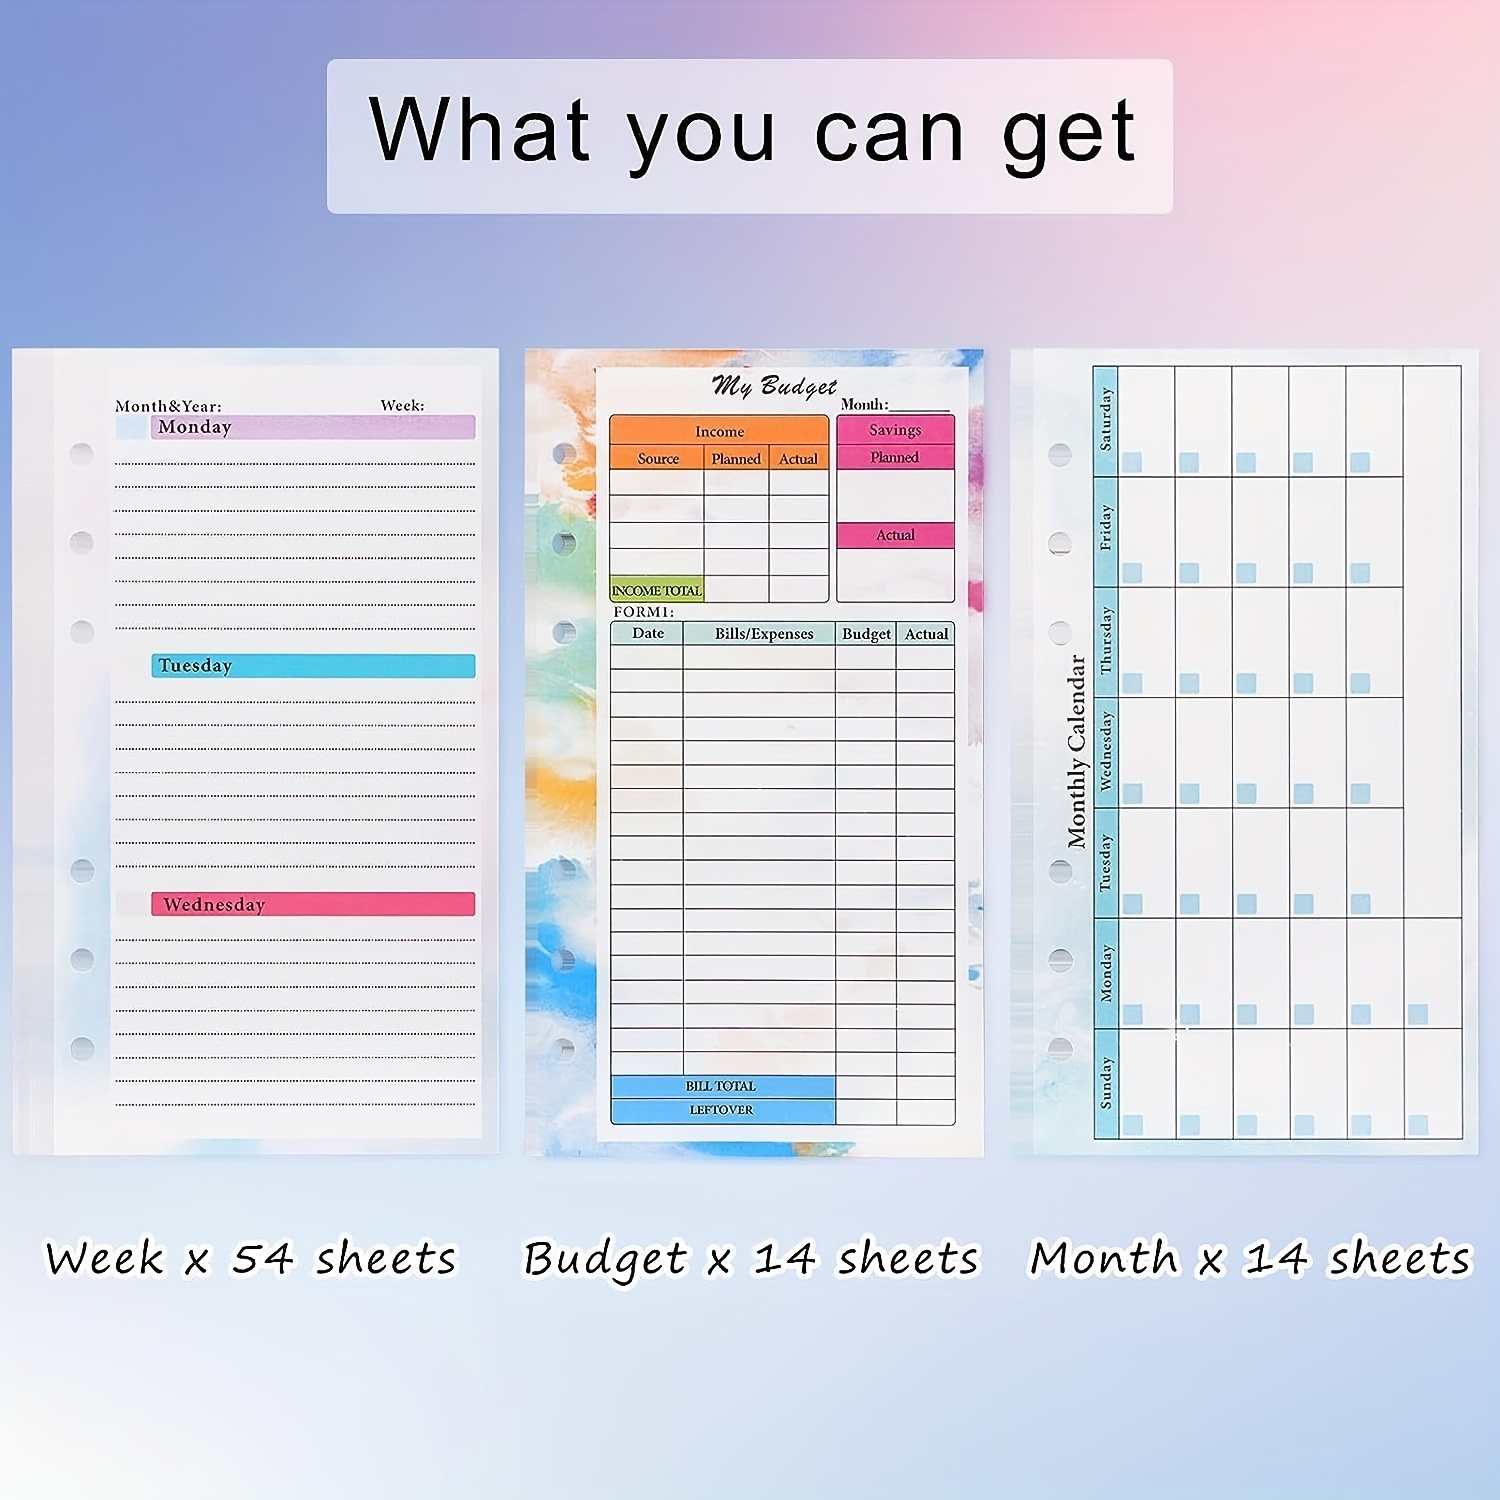 A6 Budget Planner Refill 85 Colorful Sheets Inserts for A6 Budgets